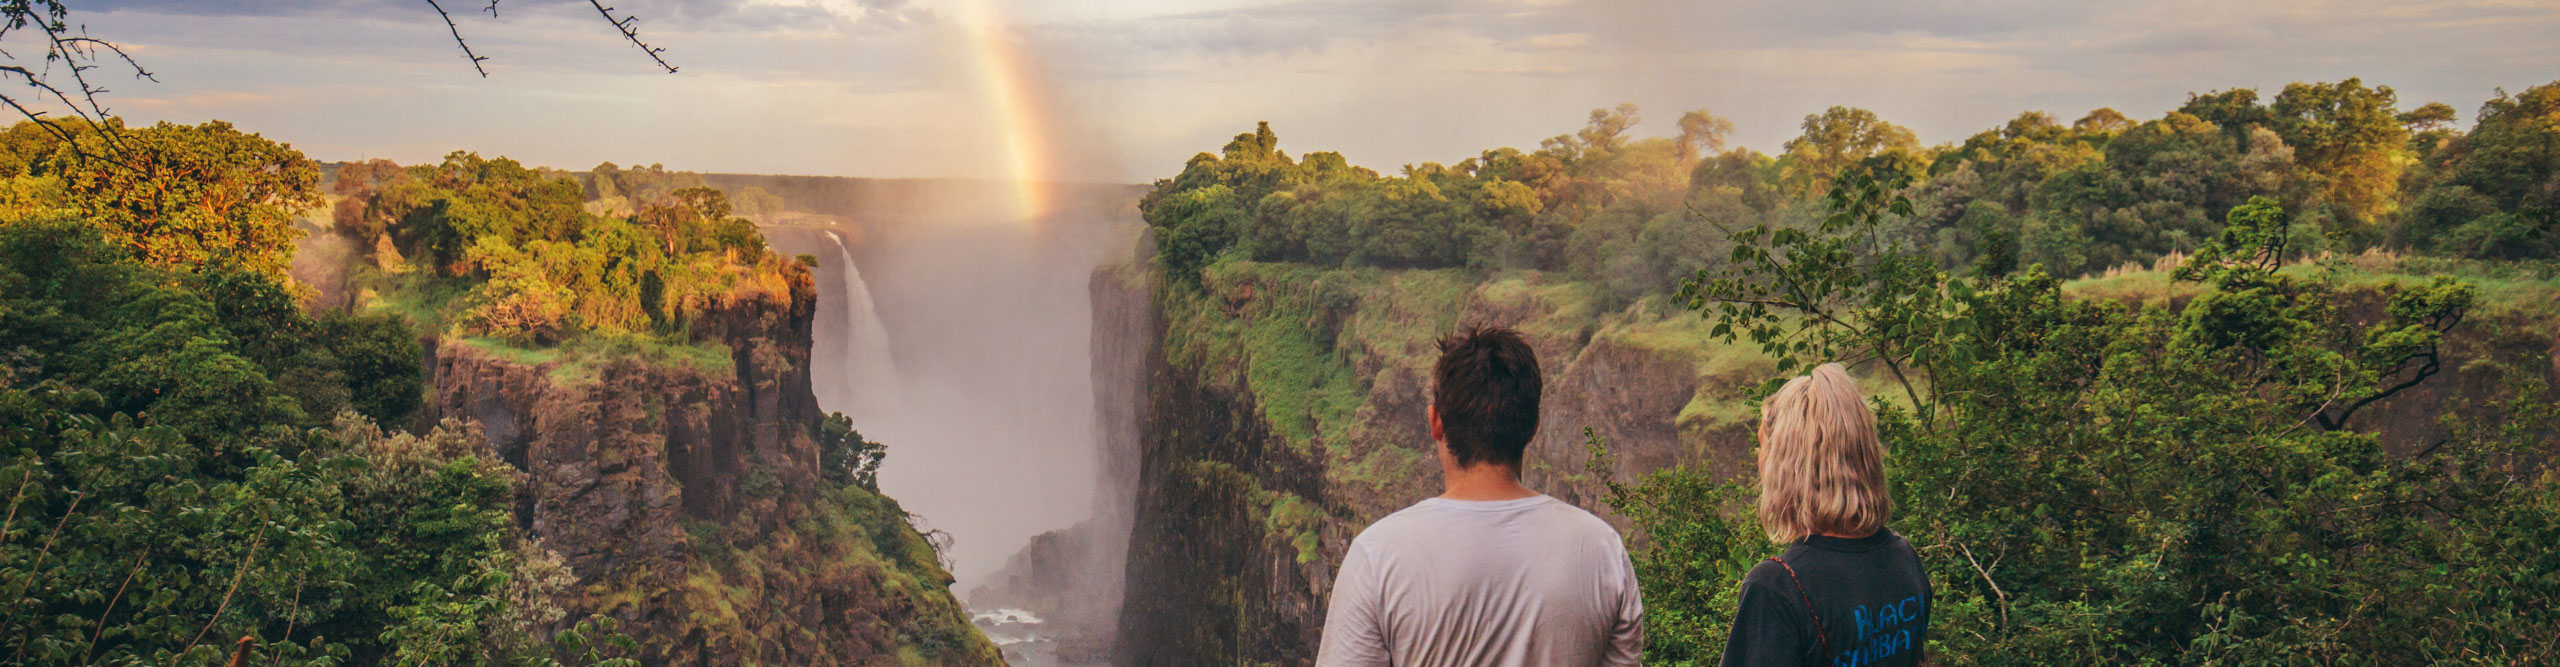 Couple looking at rainbow over Victoria Falls, on a cloudy day, Zimbabwe, Africa